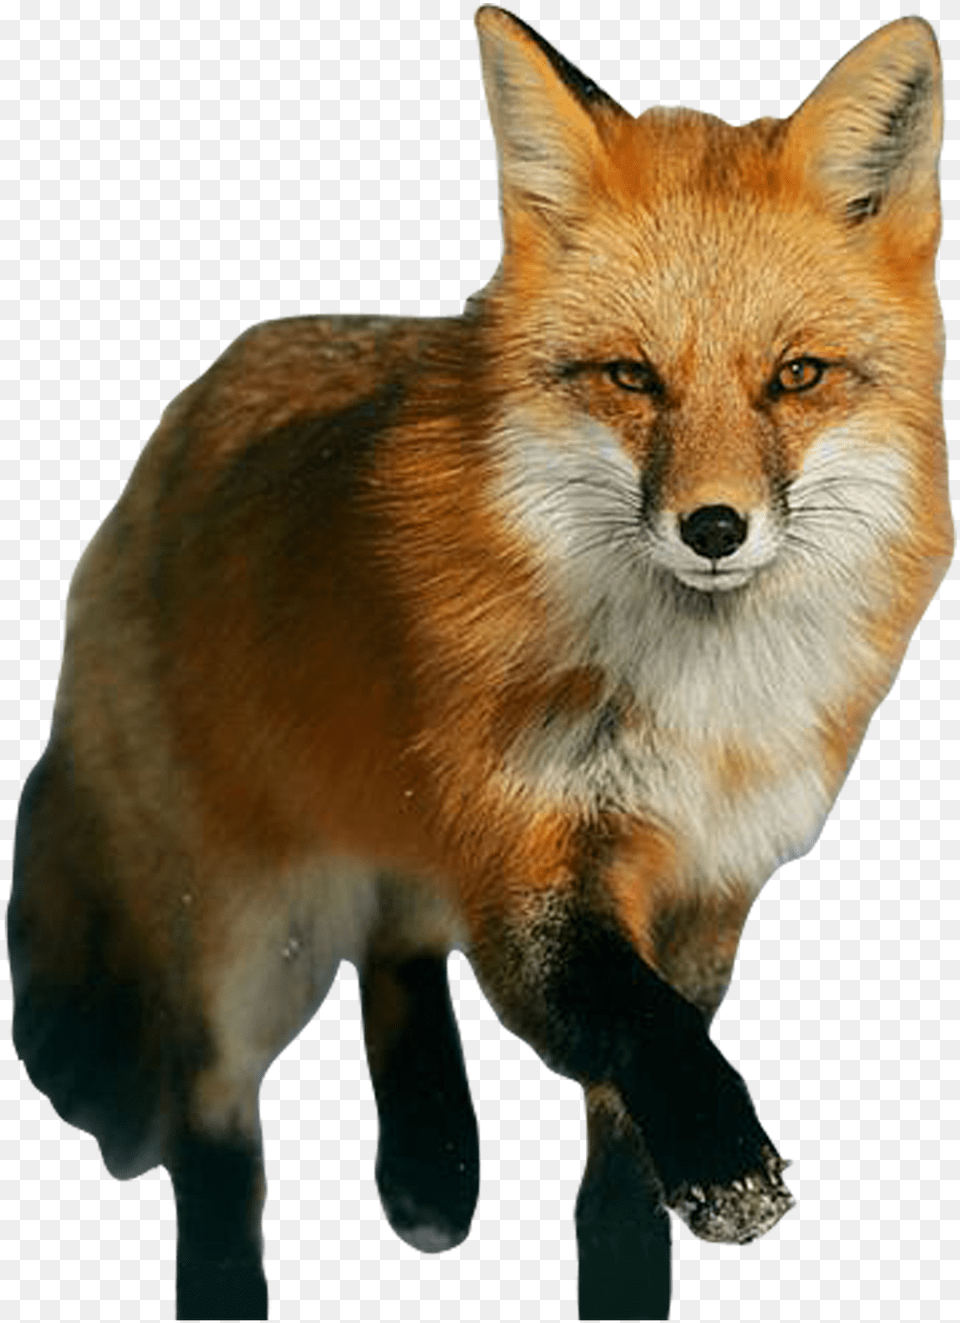 Fox Image Available To Fox, Animal, Canine, Mammal, Red Fox Free Png Download